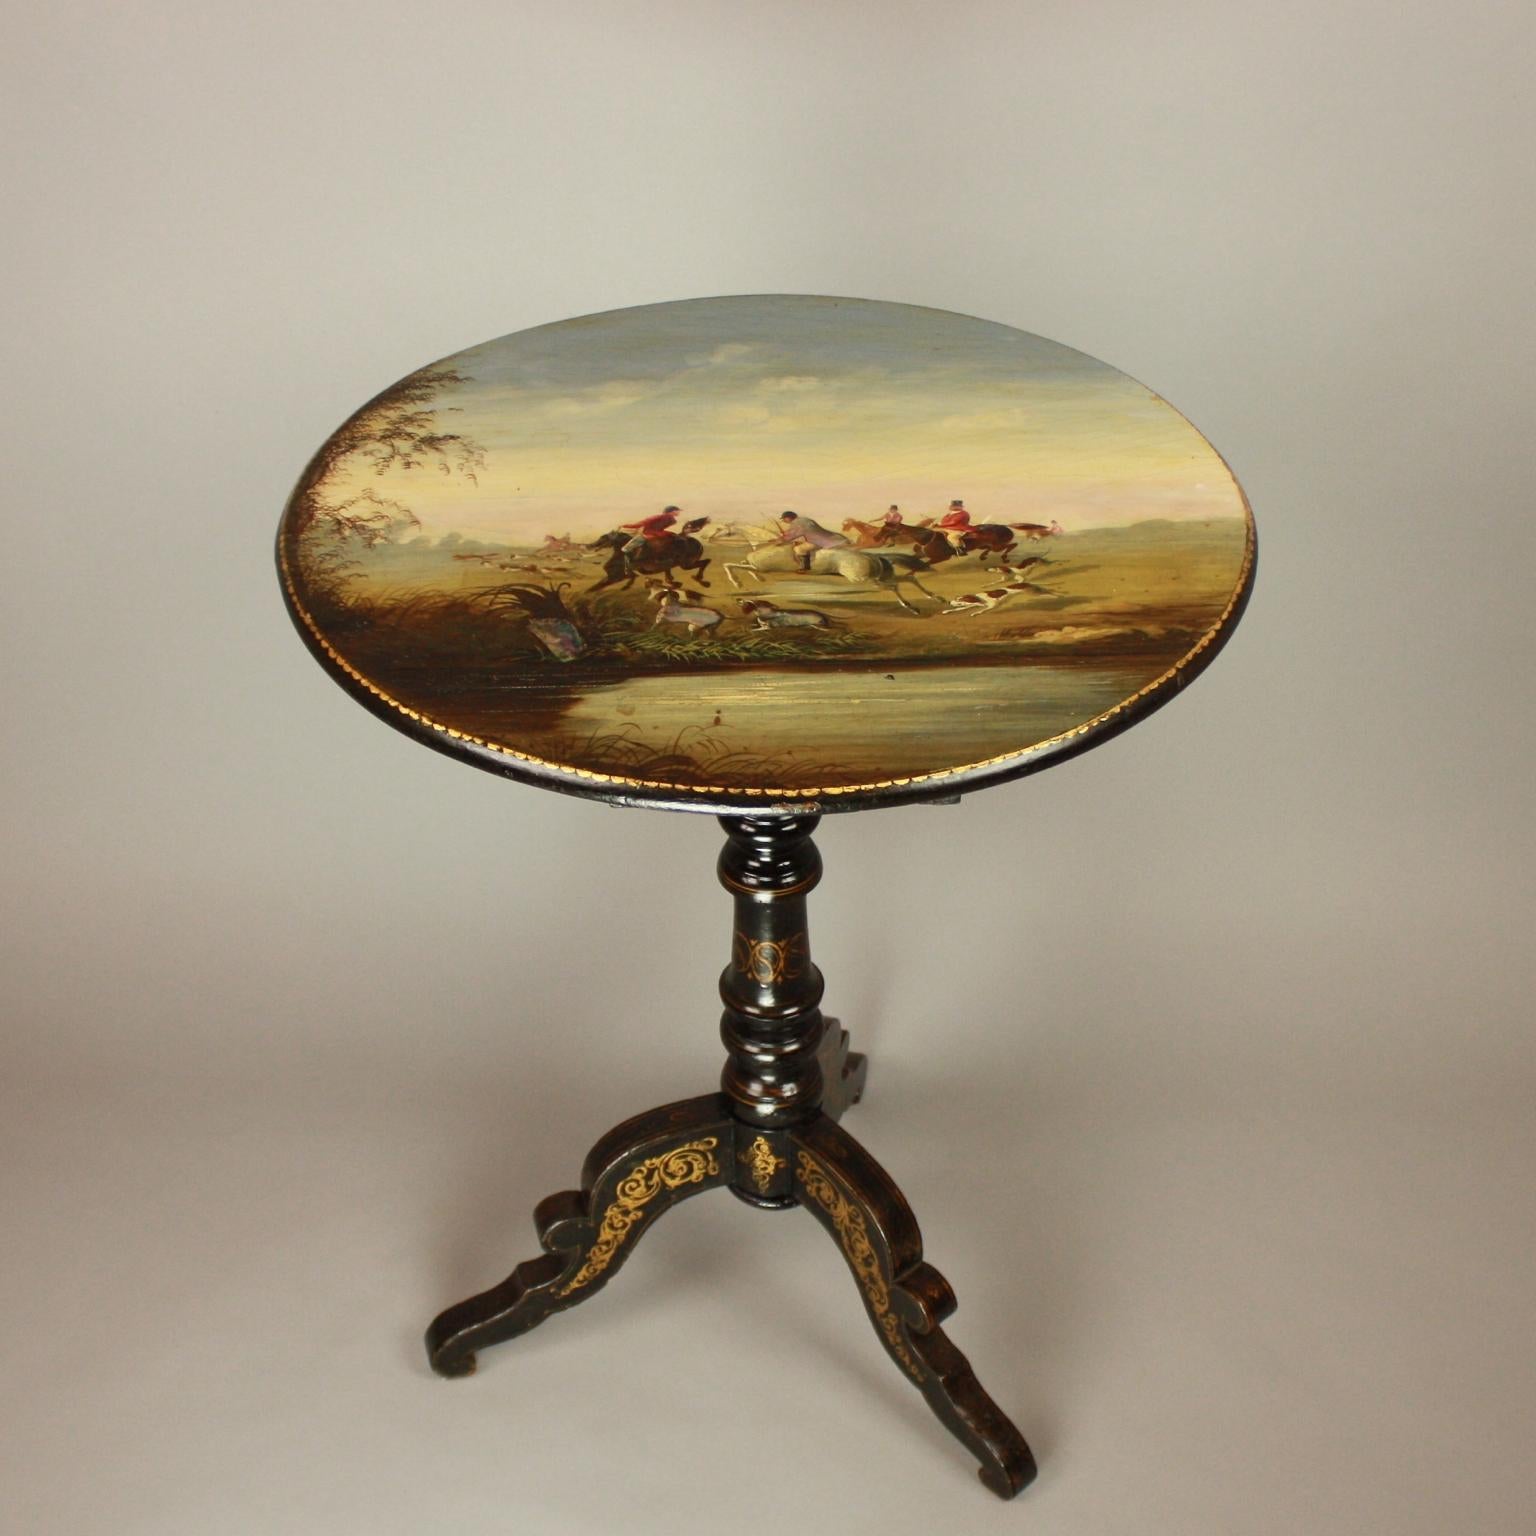 French 19th Century Napoleon III Japanned Salon or Side Table with Foxhunting Scene

A charming japanned tripod salon or side table with mother-of-pearl inset painted top depicting a fox hunting scene with horse riders in traditional hunt outfits